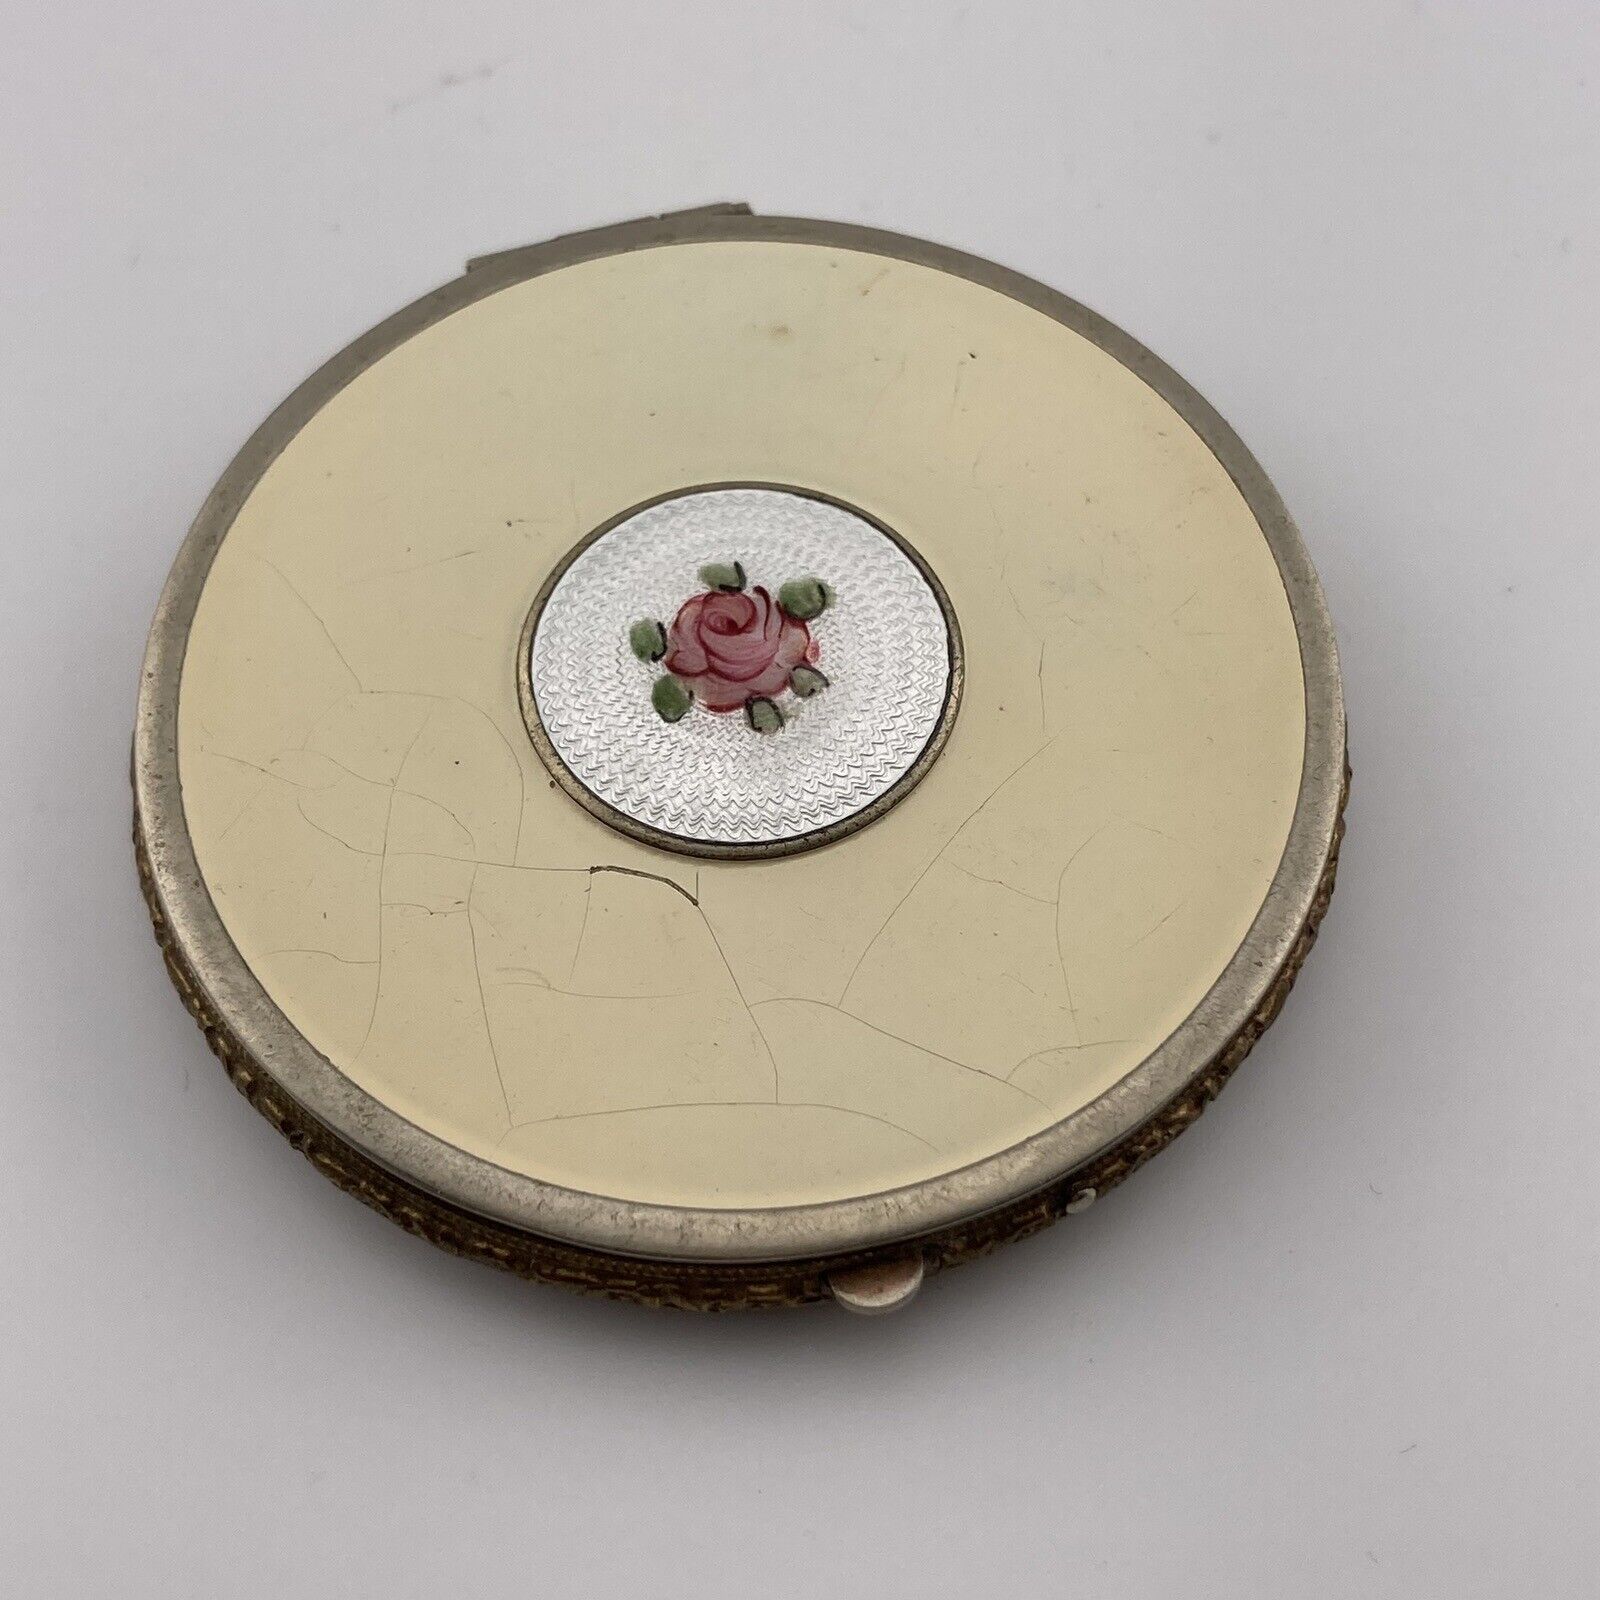 Vintage 1930s Bliss Bros Celluloid Compact with Guilloche Rose Insert